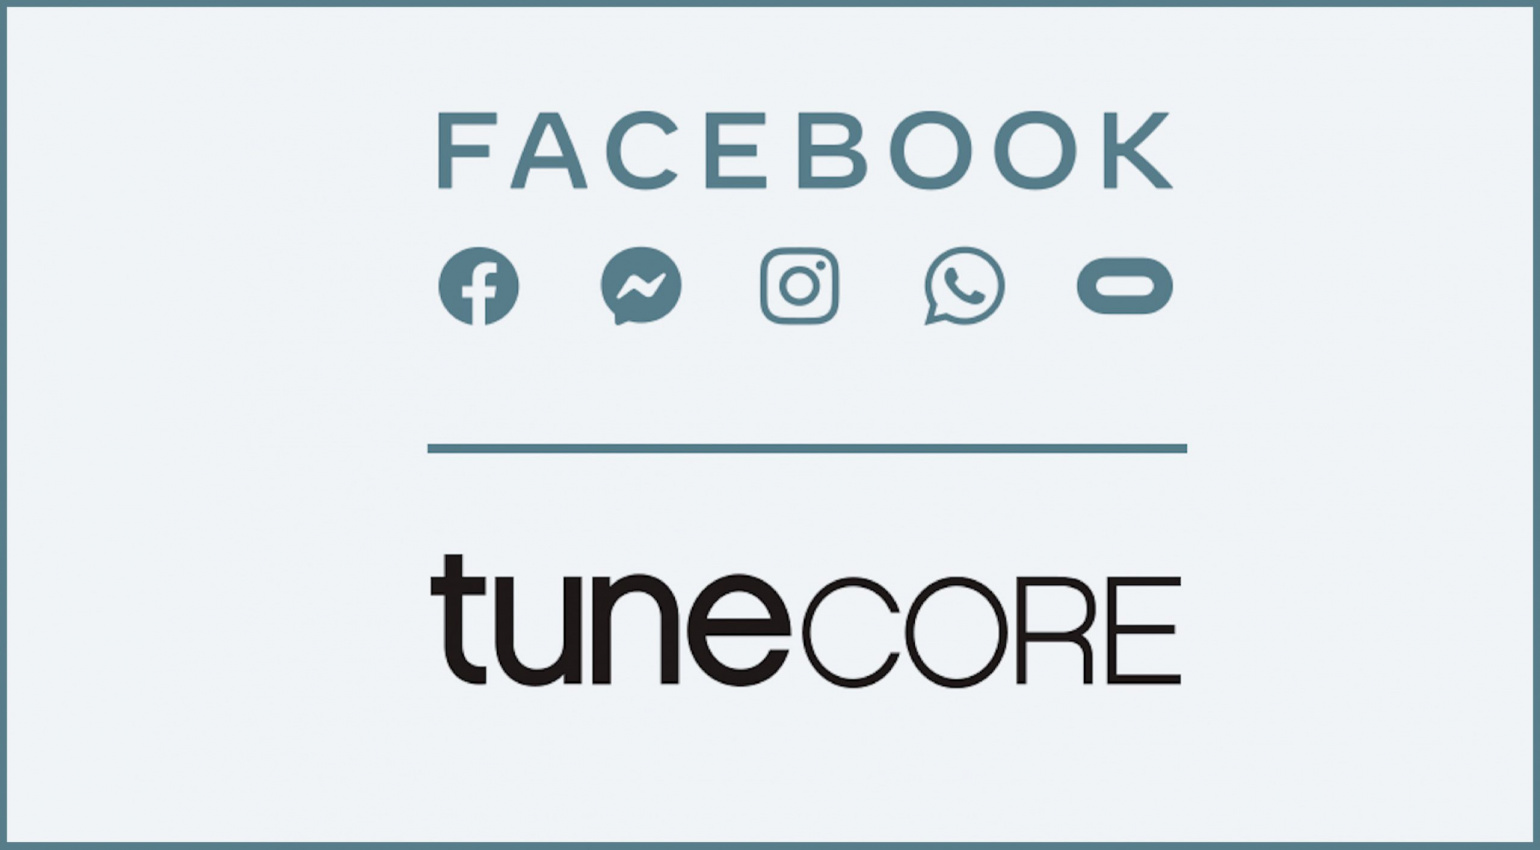 Tunecore recently launched a partnership with Facebook